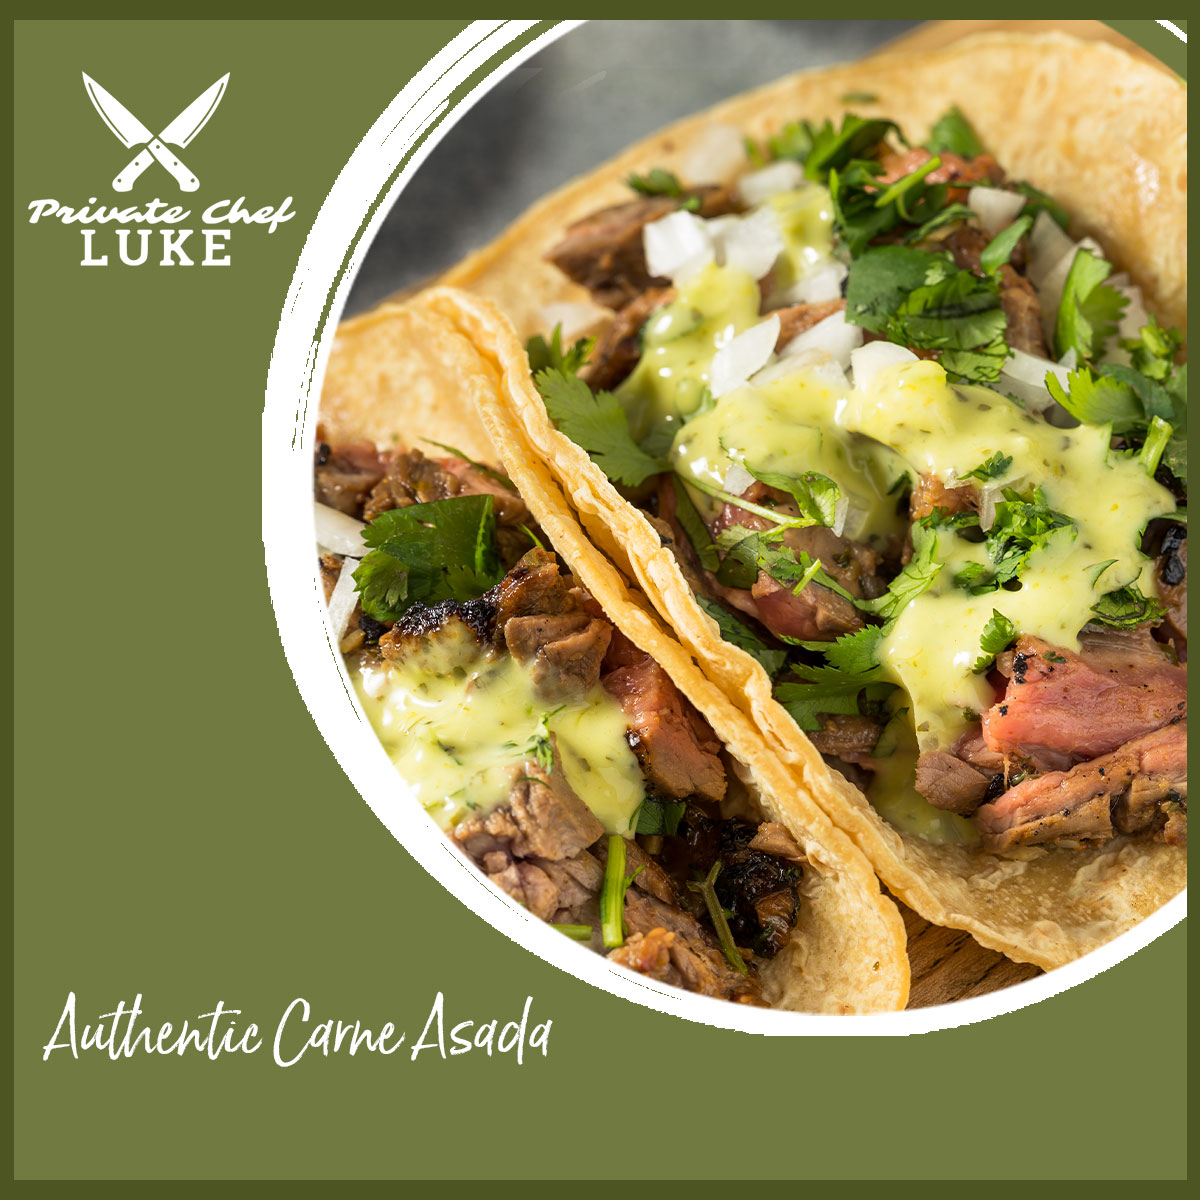 View and download Chef Luke's recipe for Authentic Carne Asada